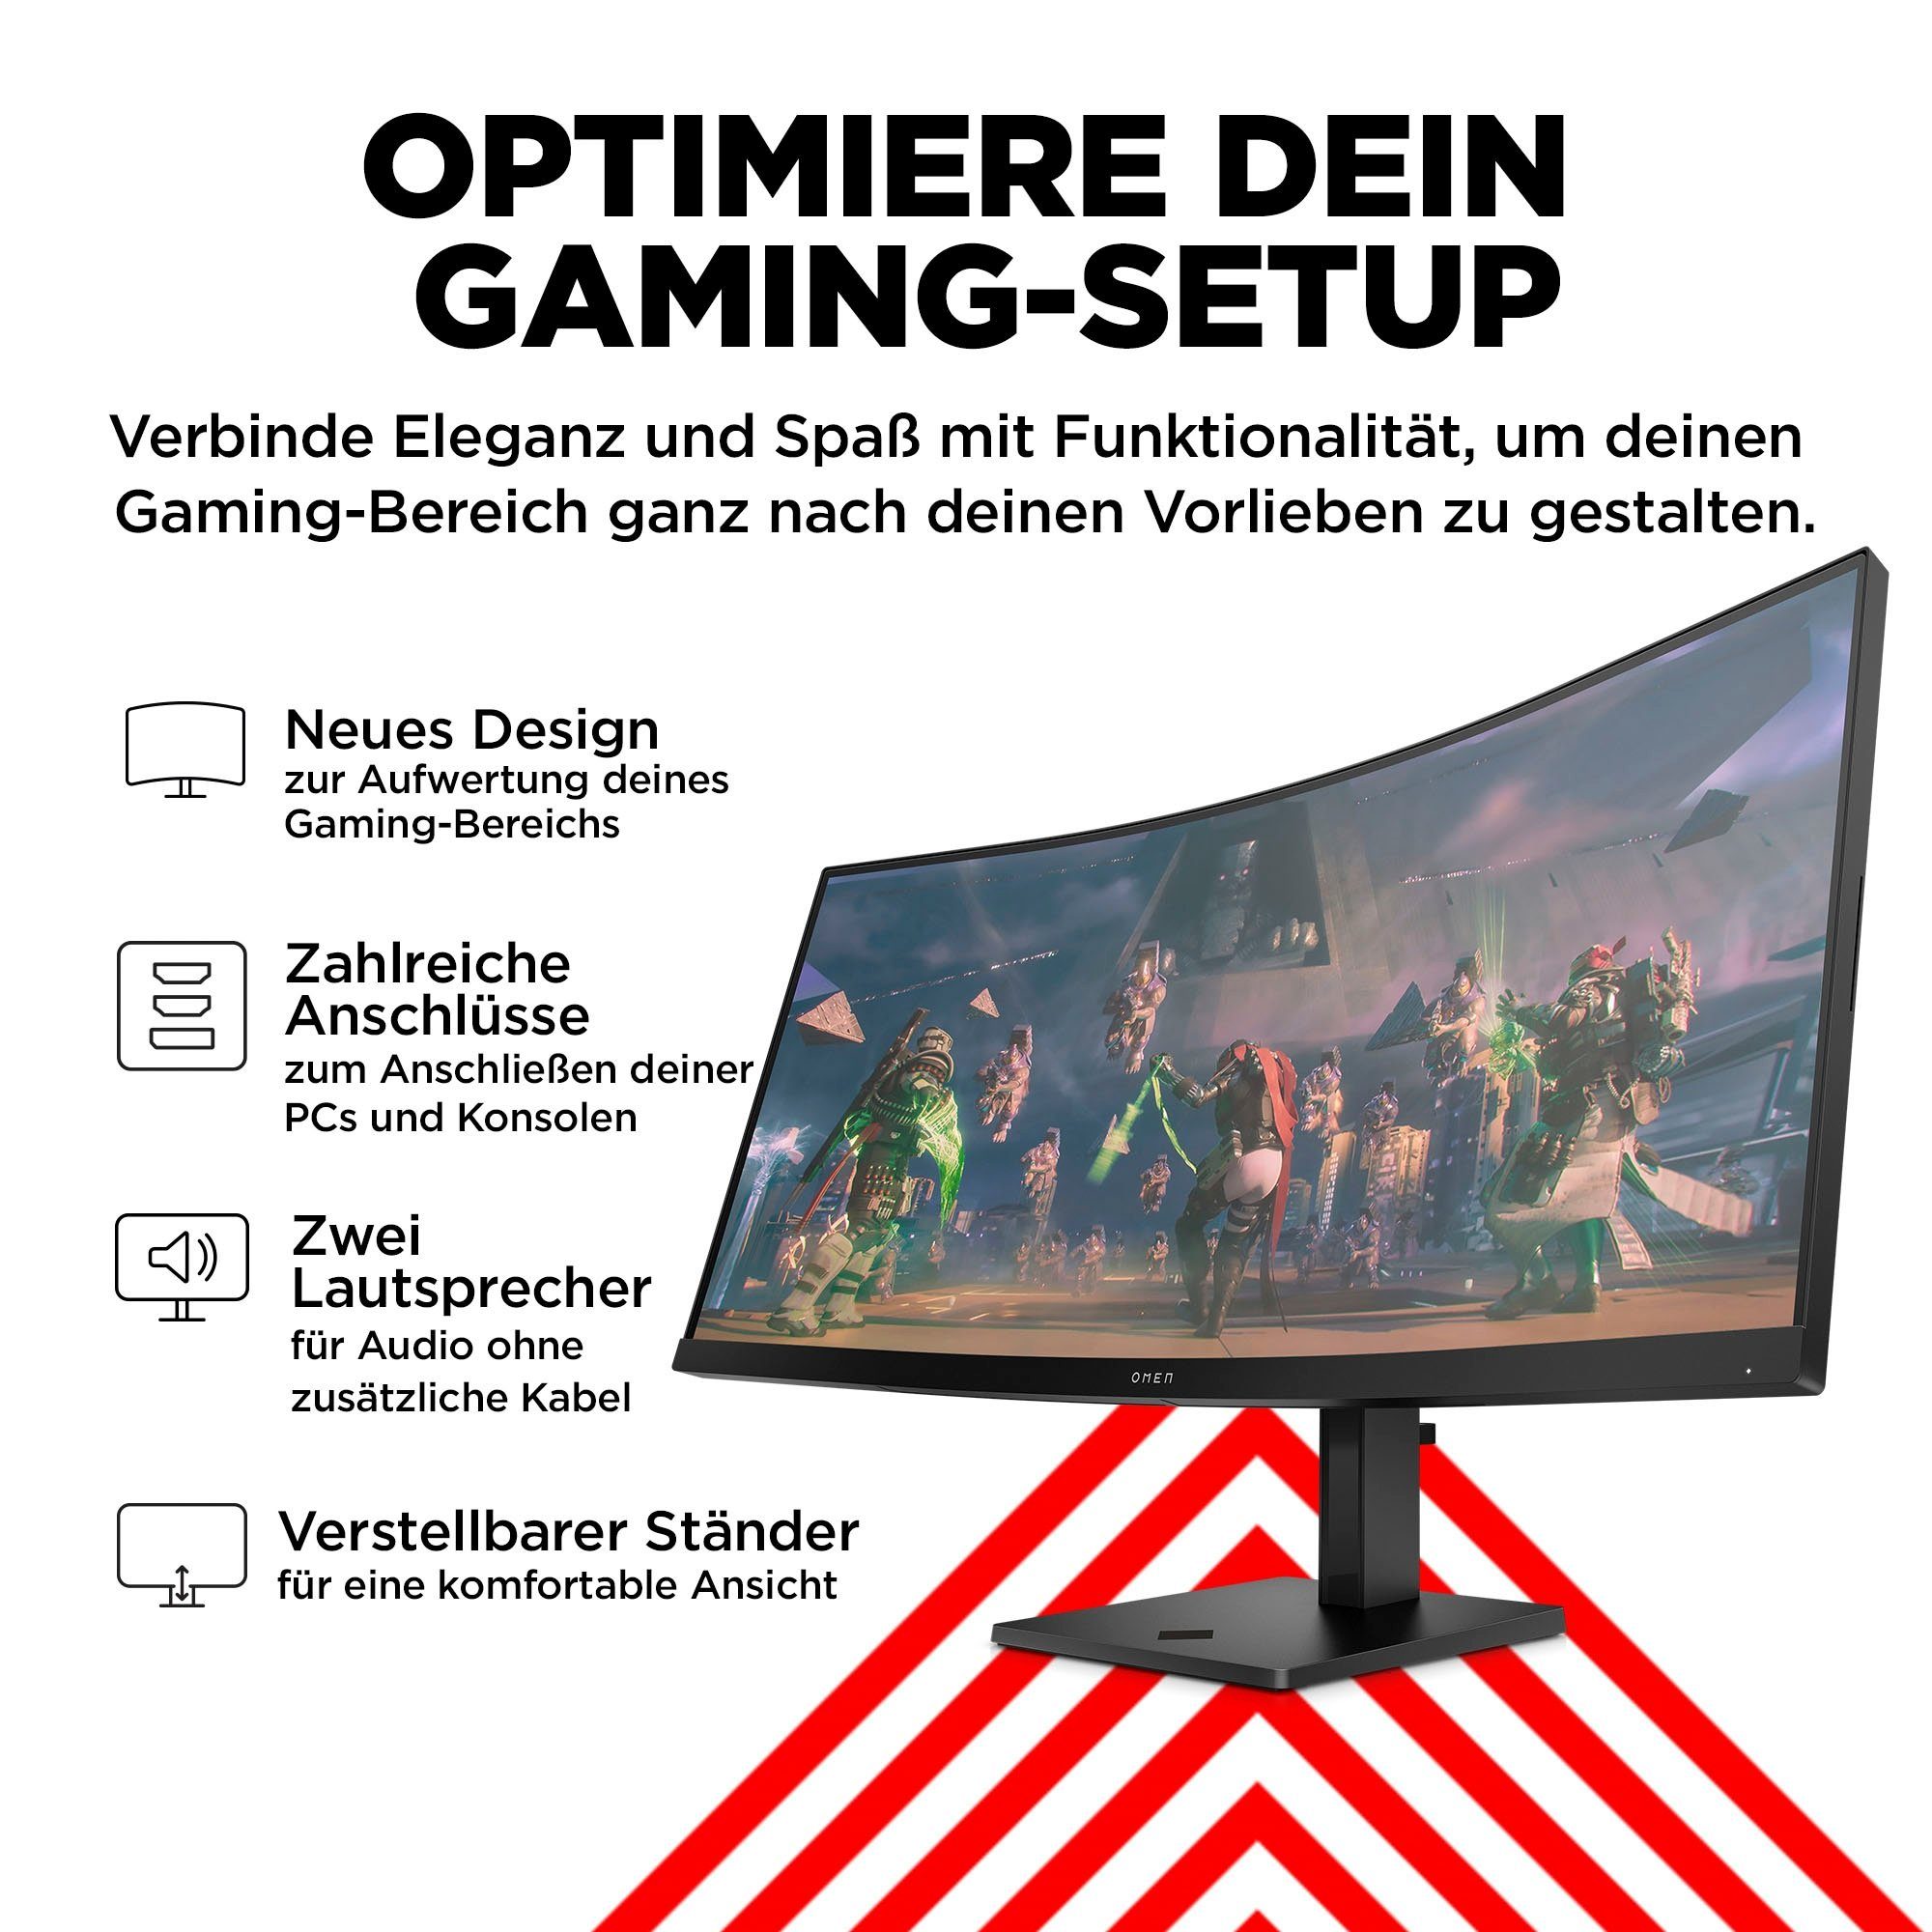 HP OMEN LED) x 165 (HSD-0159-A) 34c VA px, ms 1 cm/34 WQHD, ", Reaktionszeit, 3440 Hz, 1440 (86,4 Curved-Gaming-Monitor